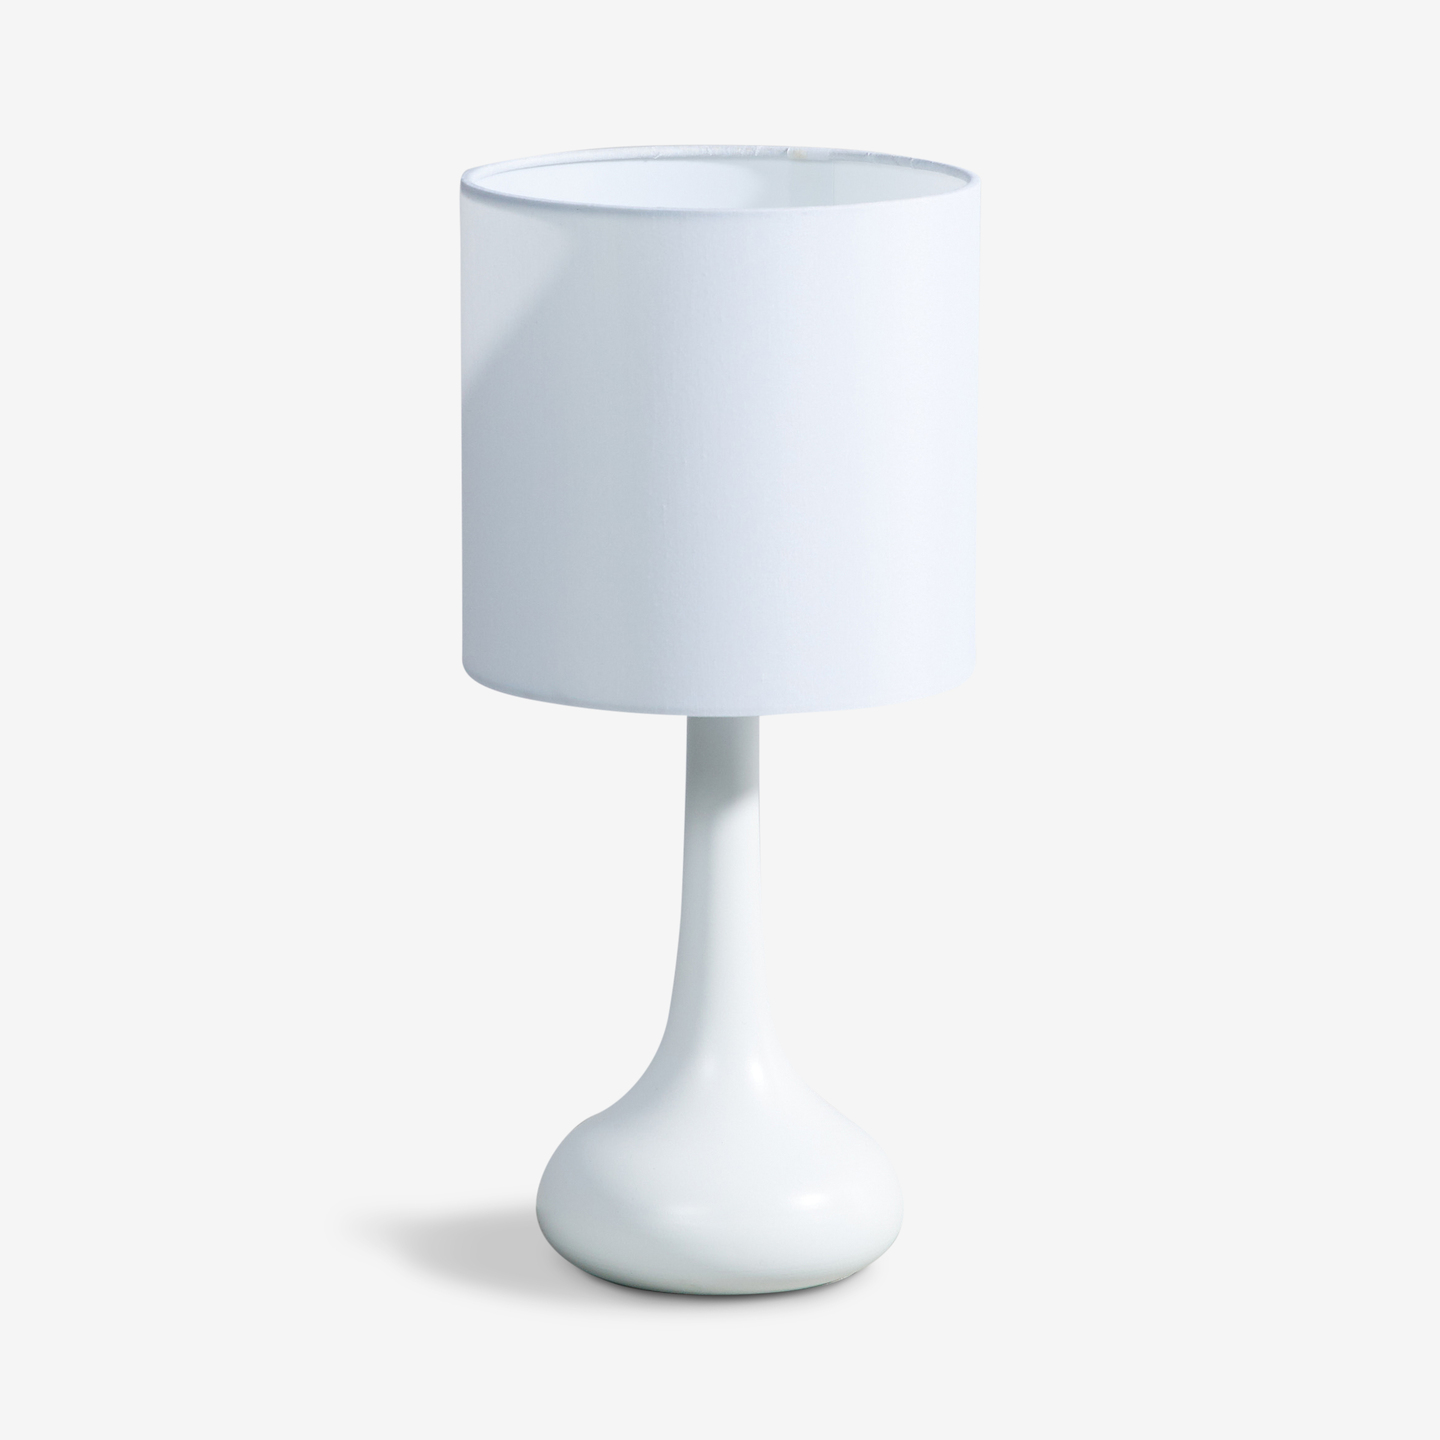 83_Lunar-Table-Lamp-White_Flat-Front 2020